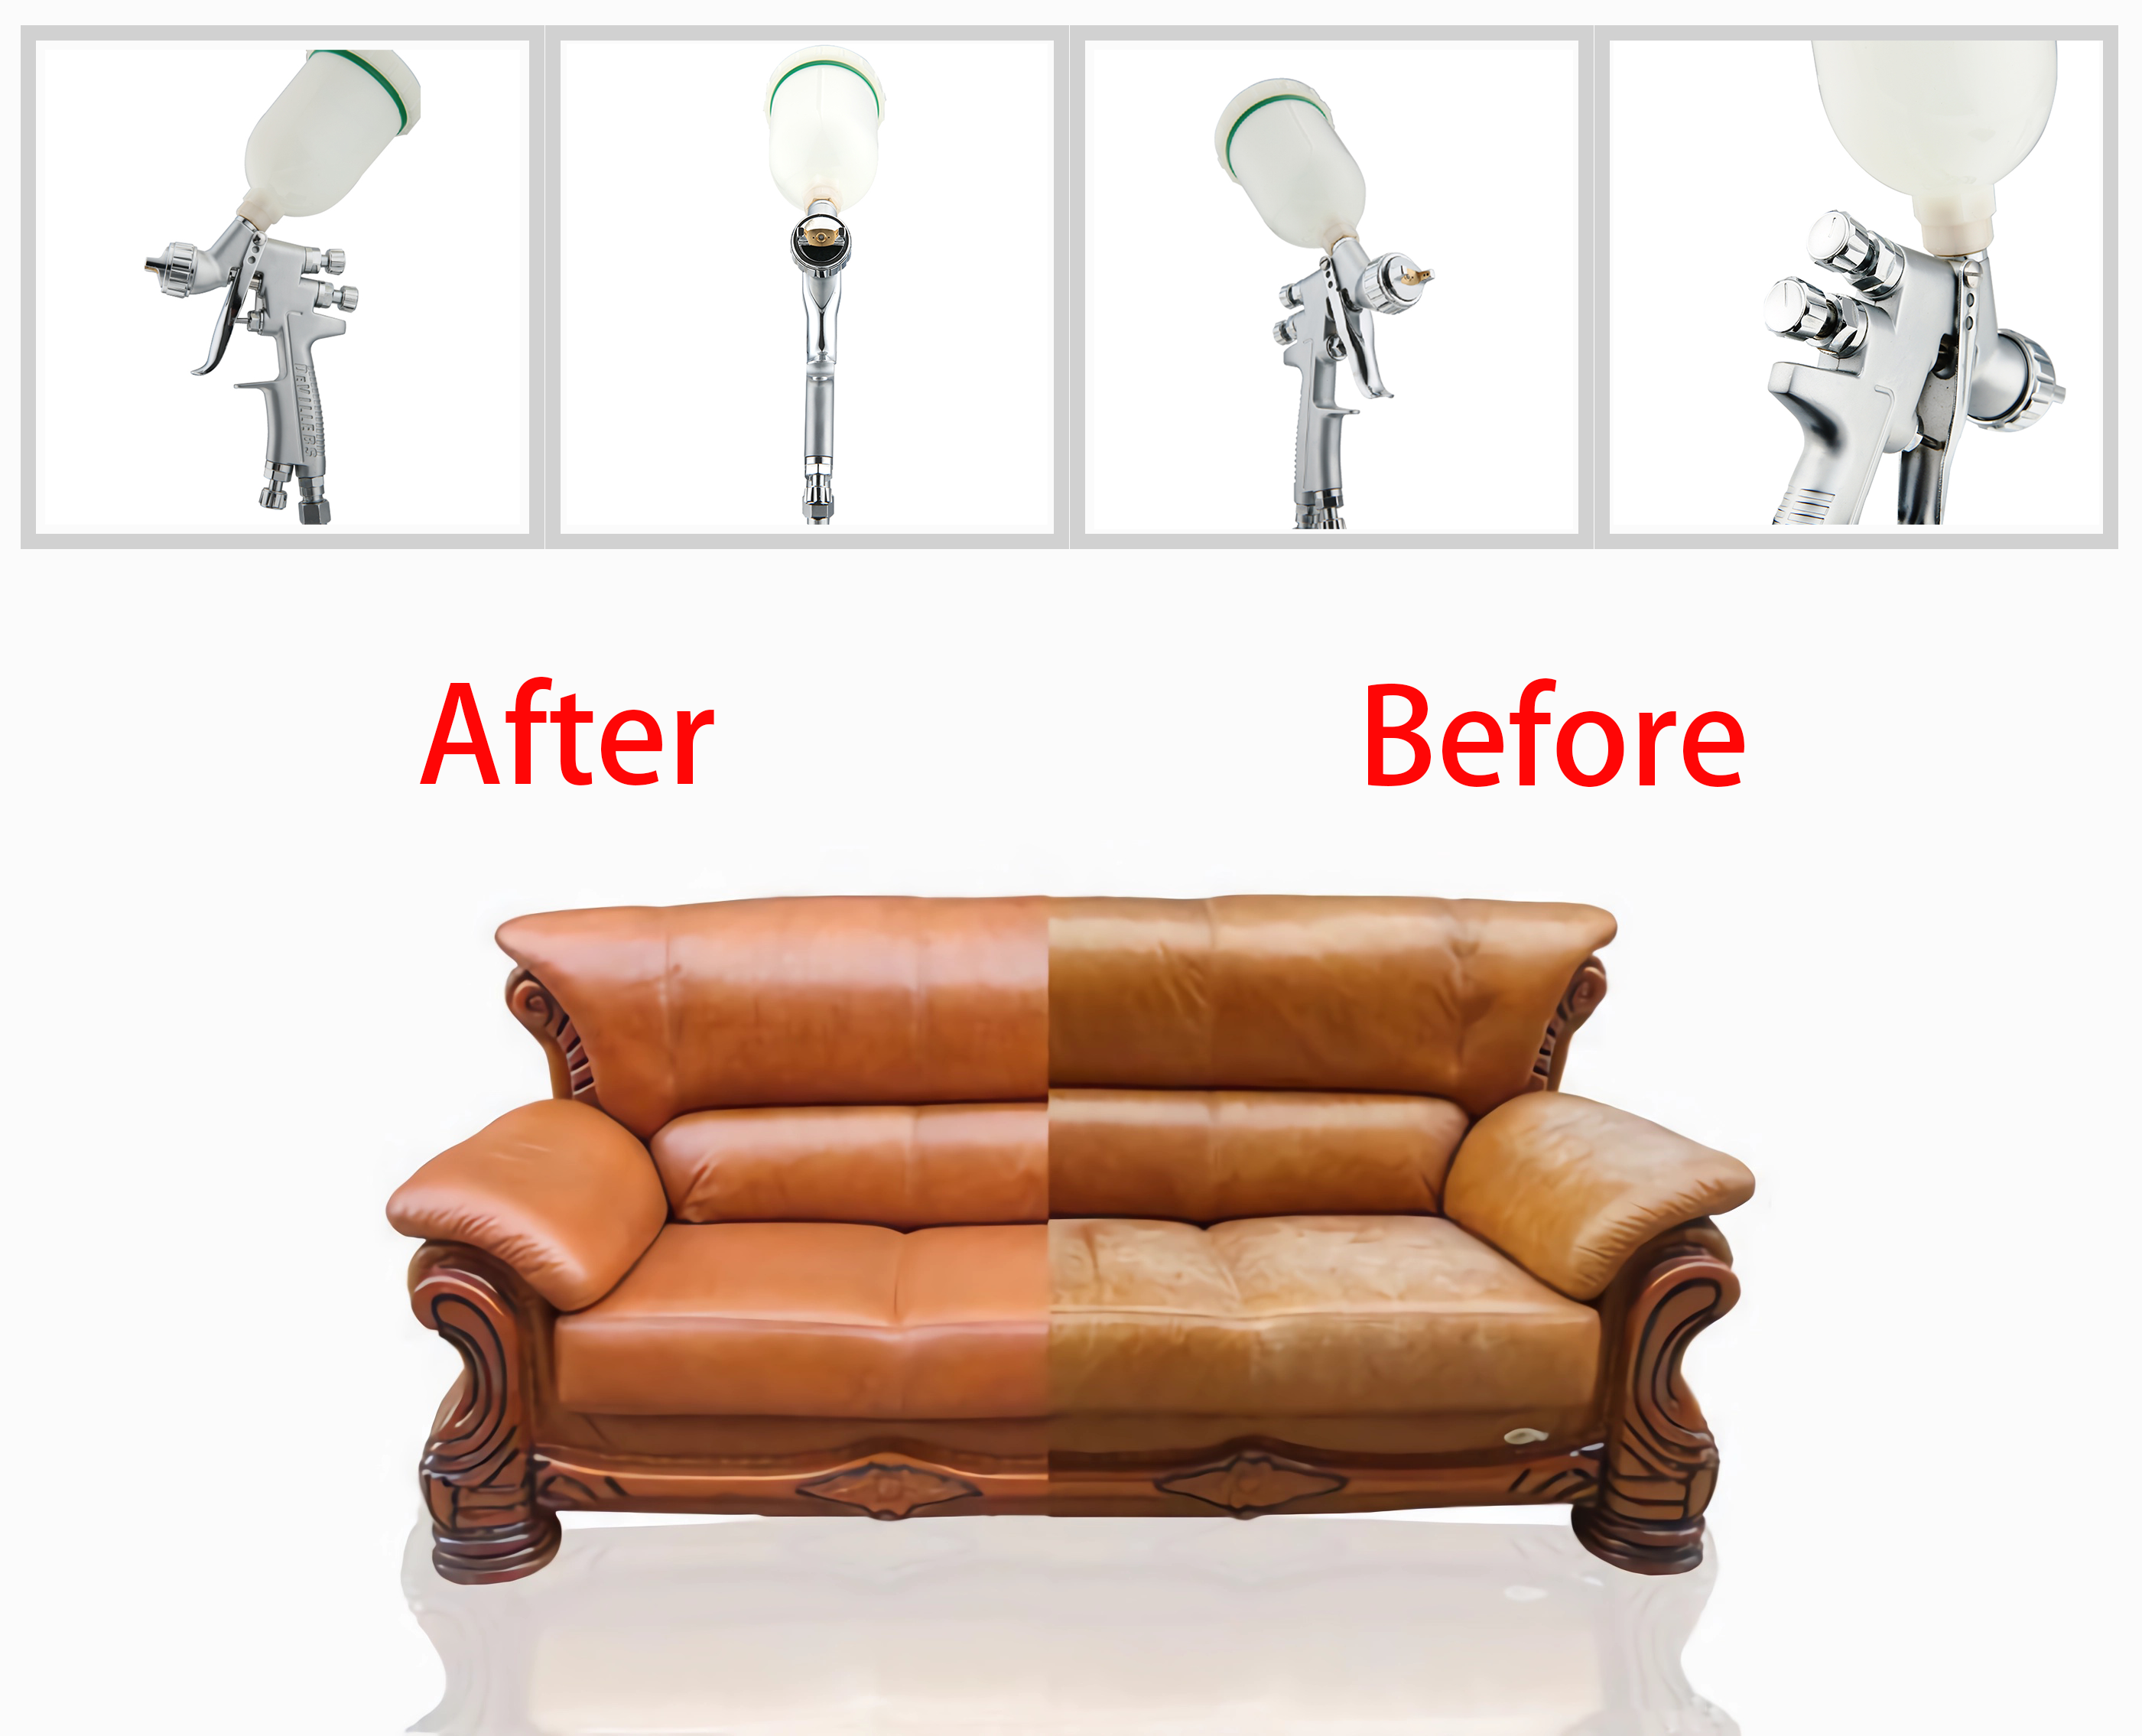 Our British customer used the SPURUI repair spray gun to easily repair the leather sofa at home